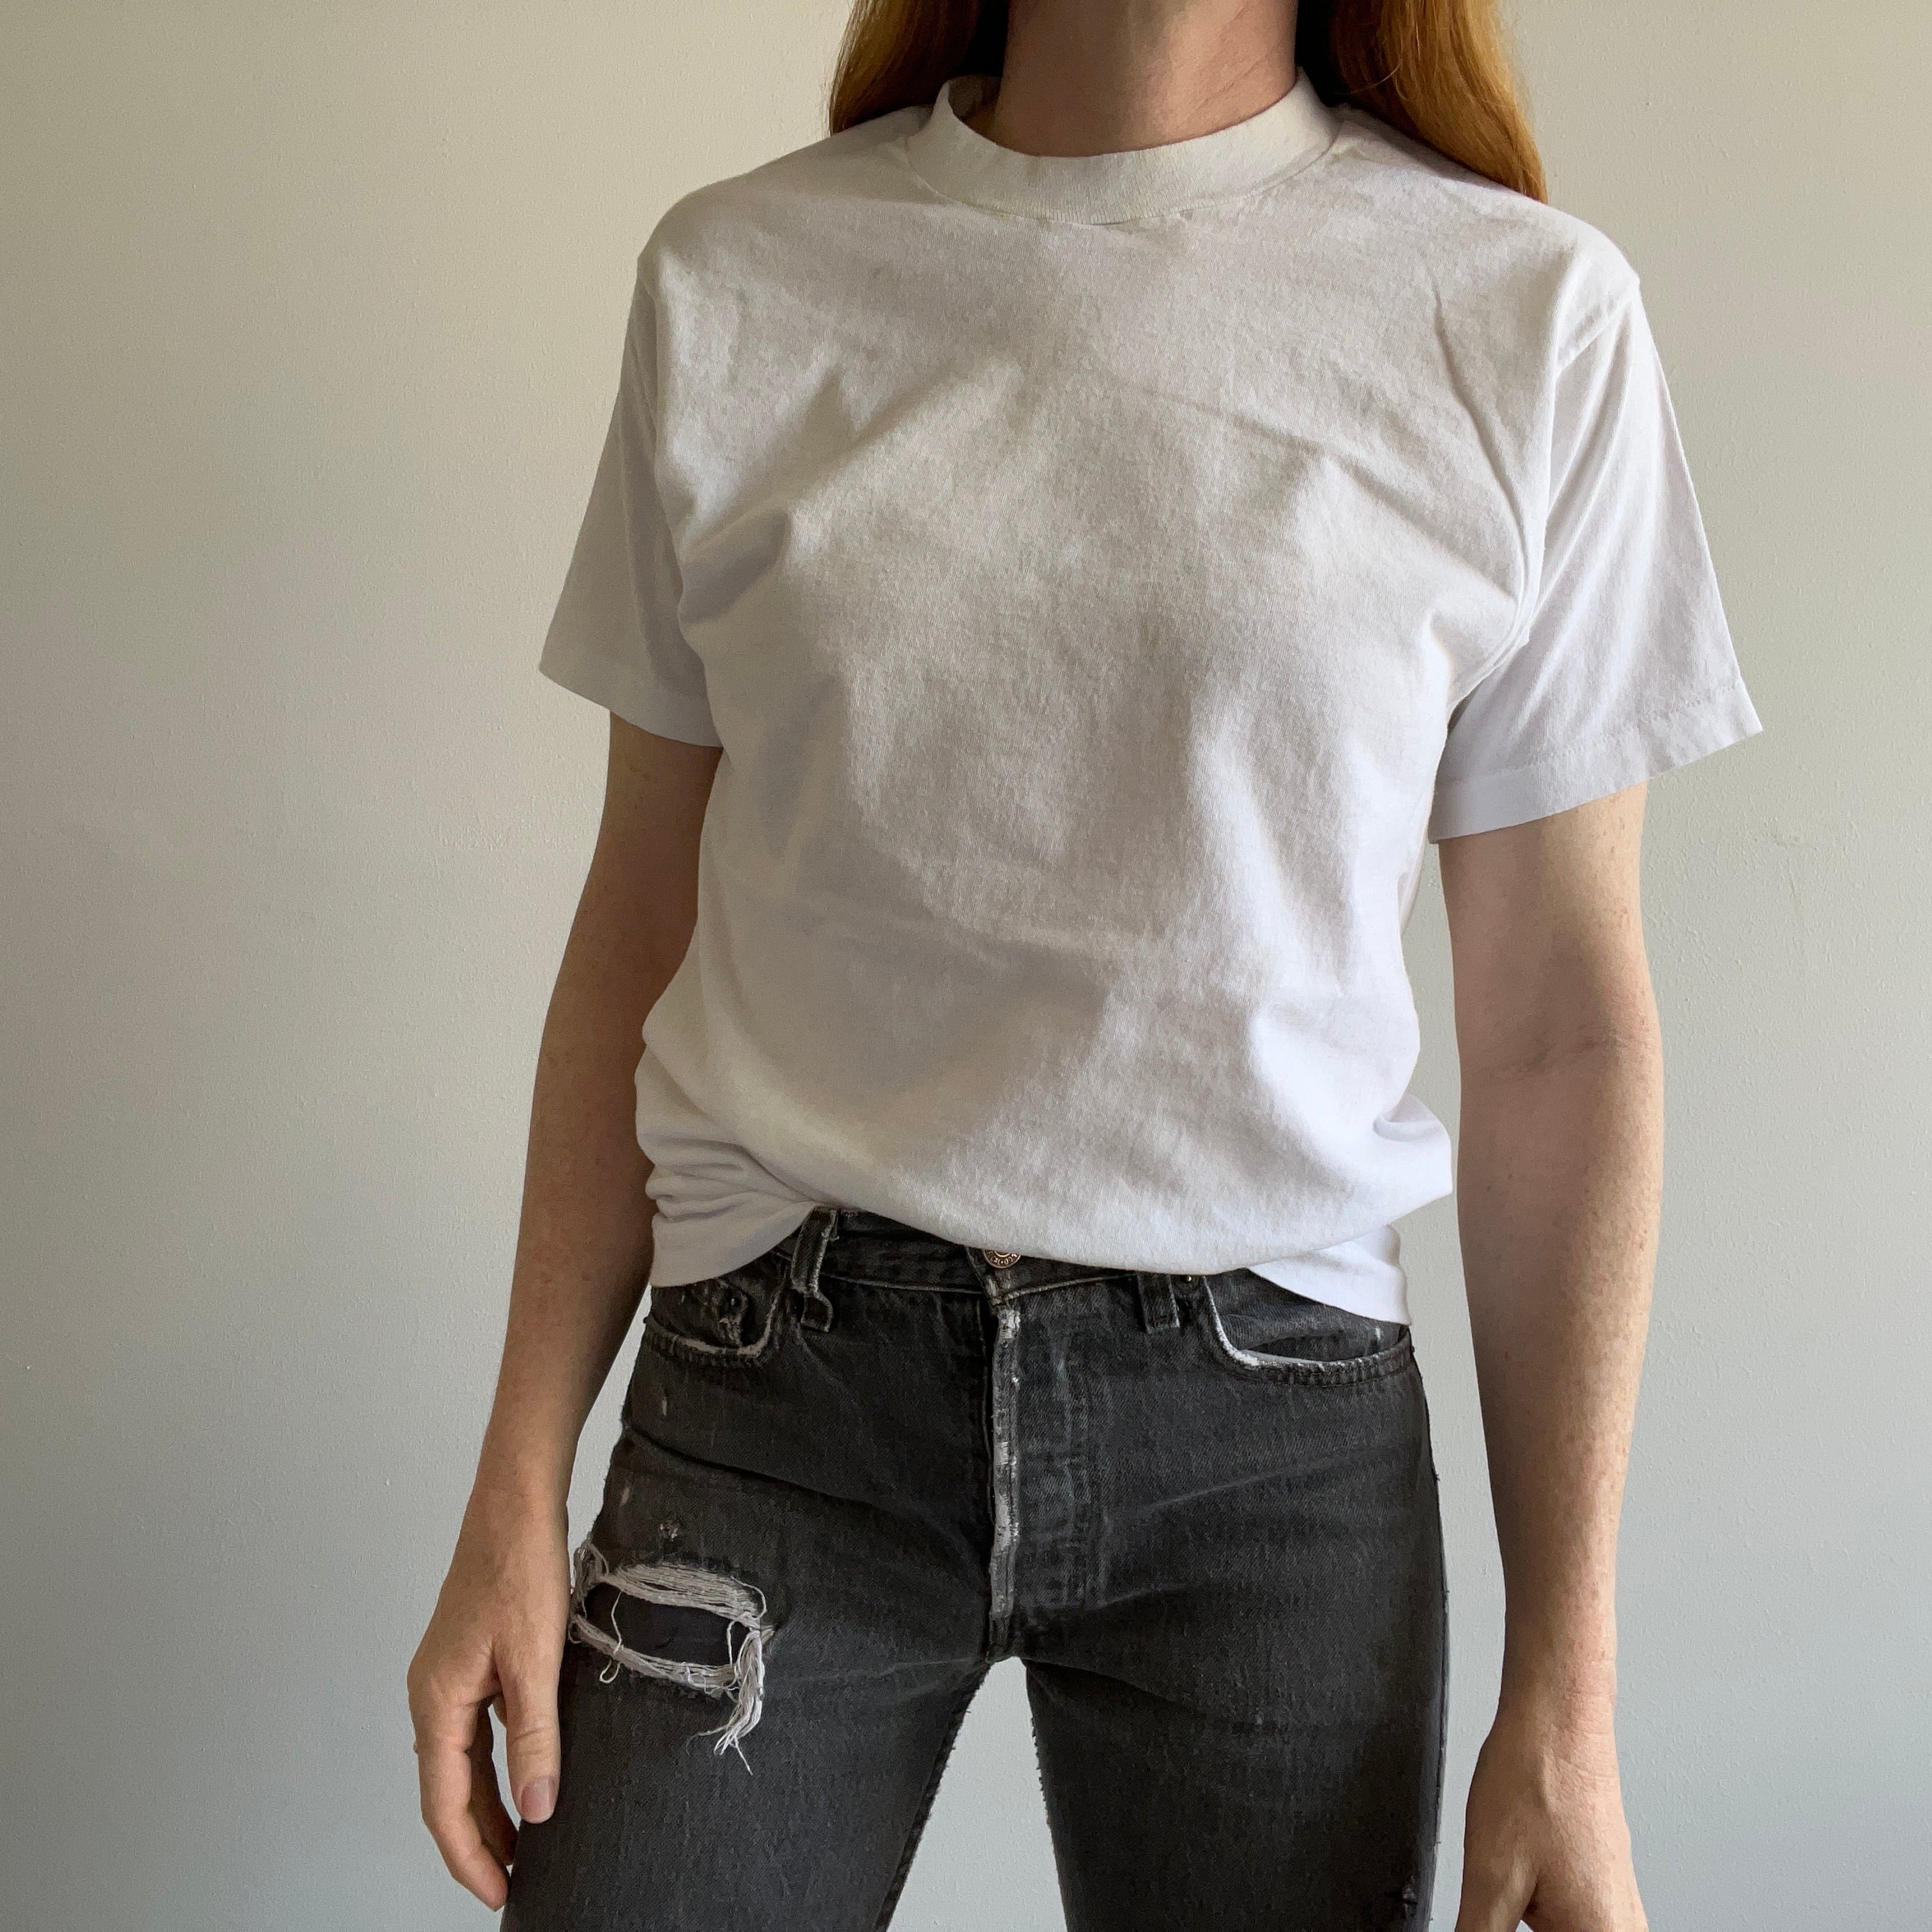 1980s Blank Aged White T-Shirt